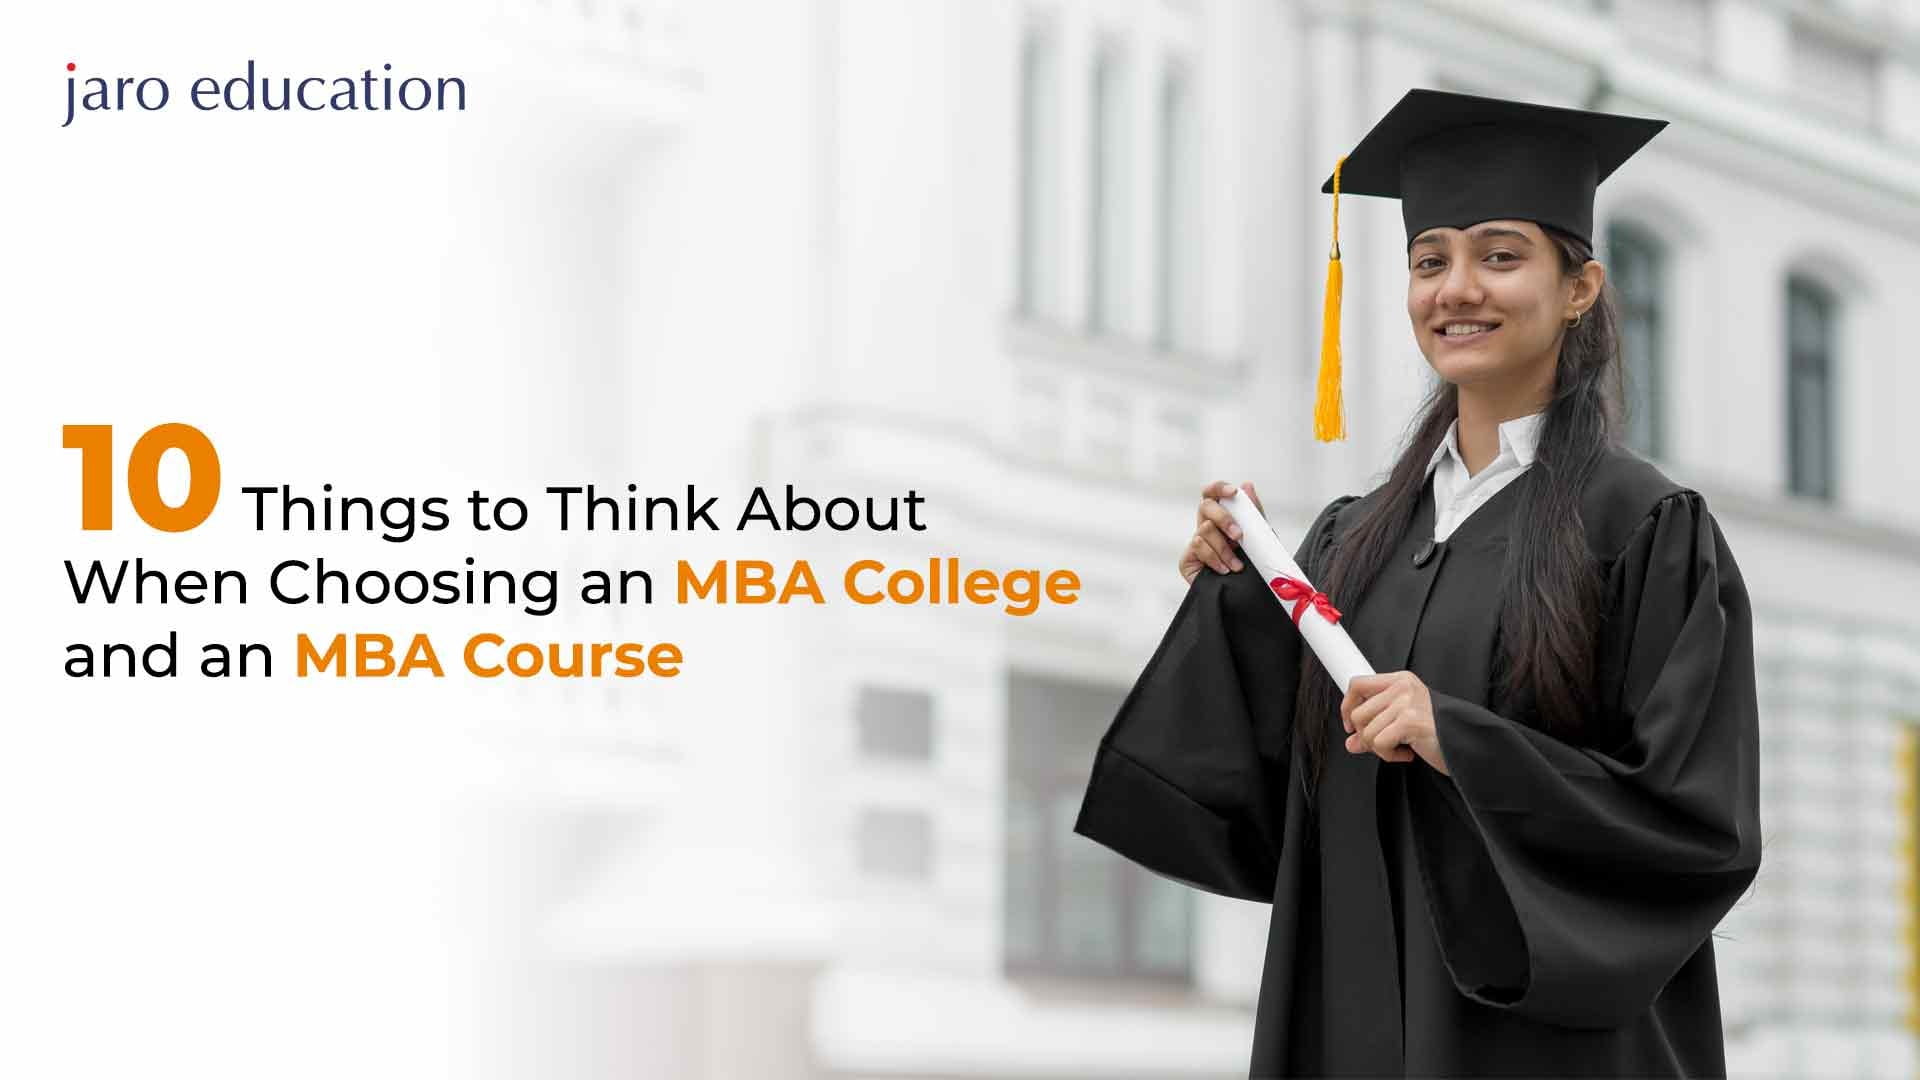 10-Things-to-Think-About-When-Choosing-an-MBA-College-and-an-MBA-Course_5_11zon jaro